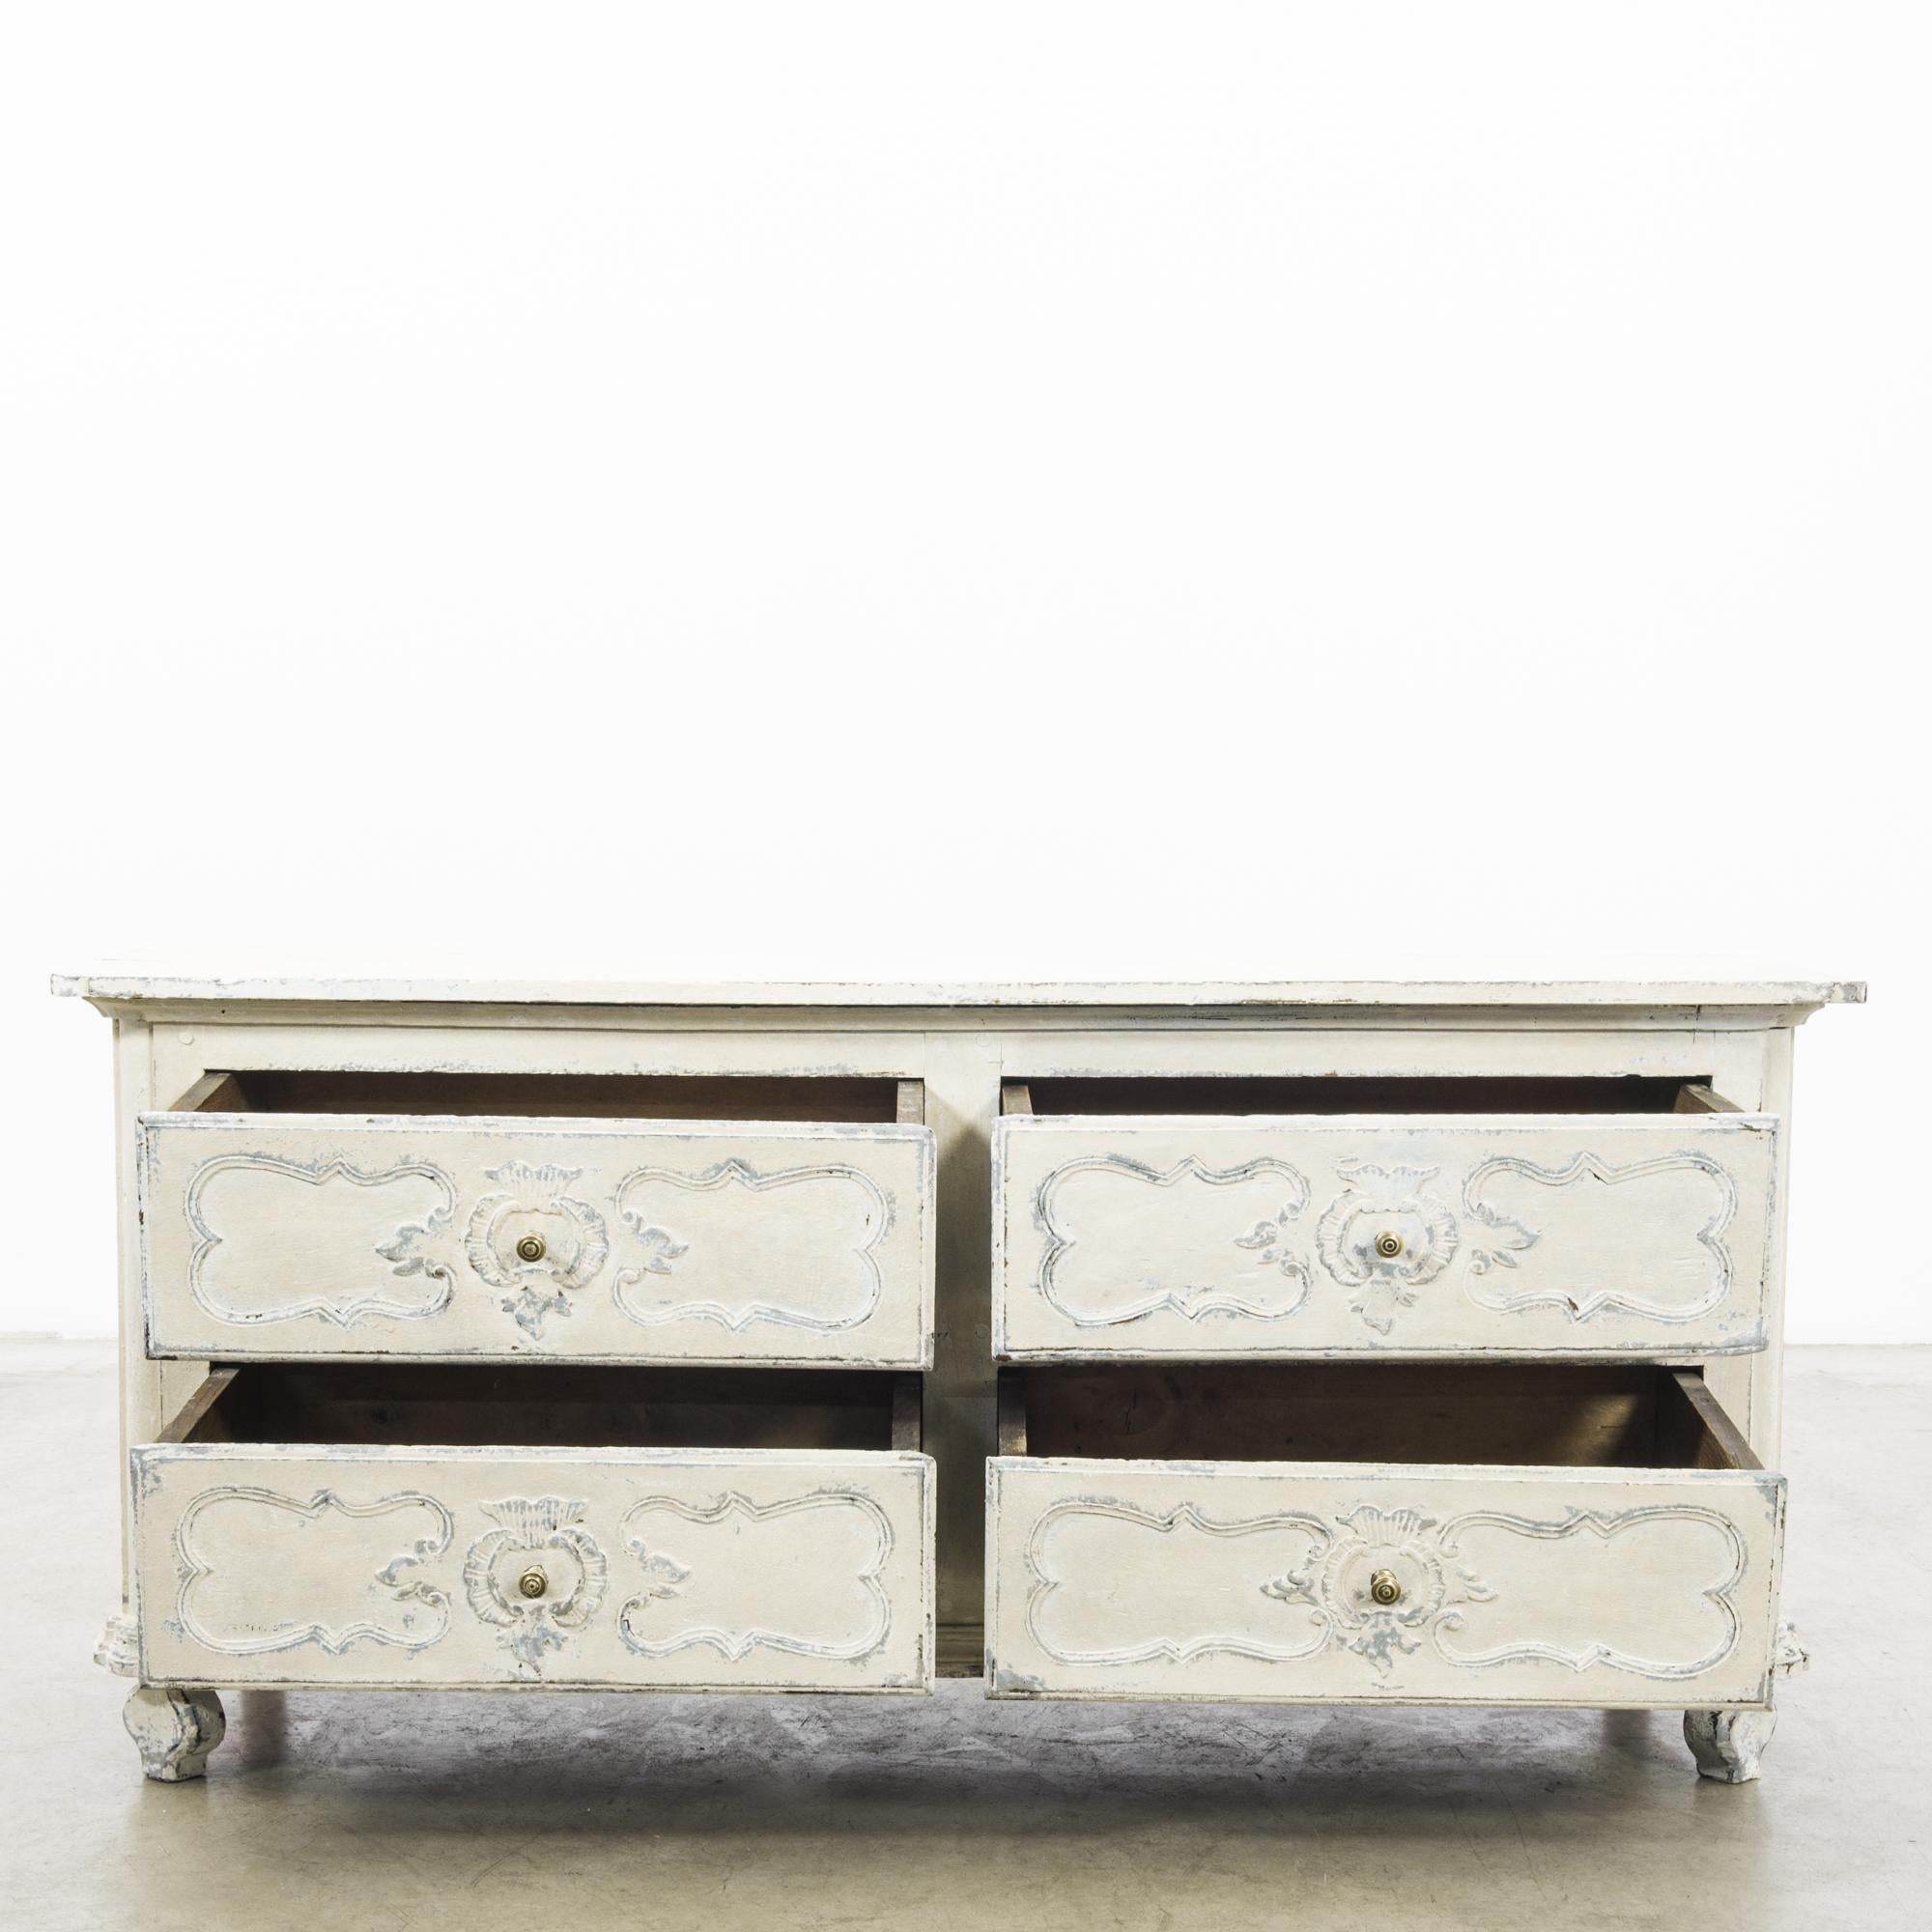 Step back into the romantic era of the 1850s with this French wooden chest of drawers, adorned with a white patina that tells a story of time's passage. Each drawer features intricate, hand-carved detailing, accentuating its vintage charm and